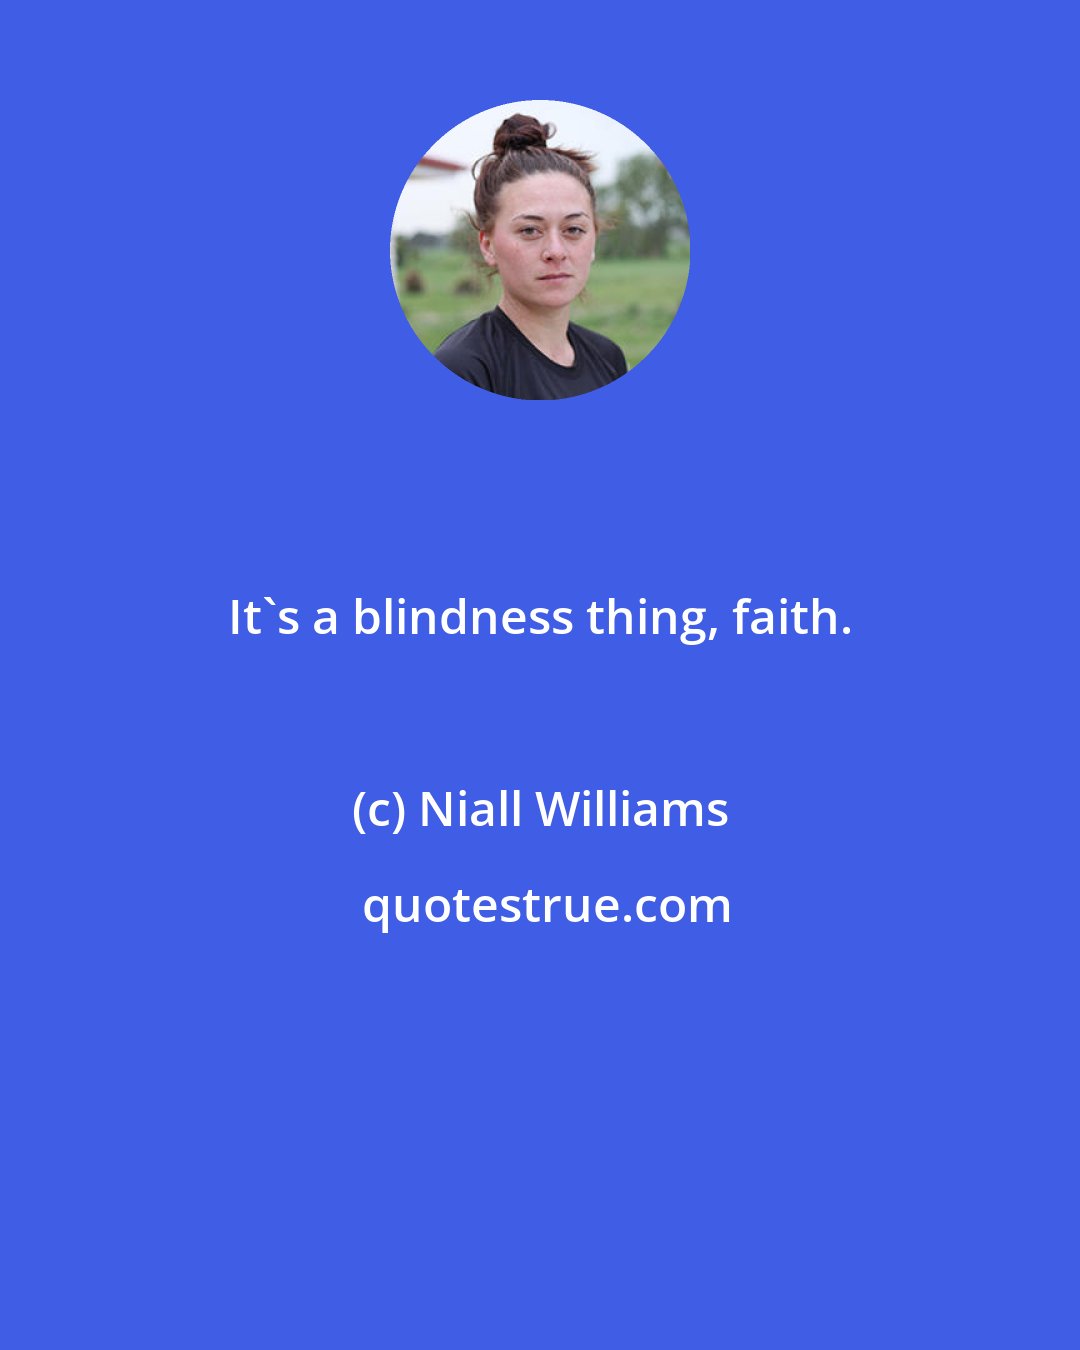 Niall Williams: It's a blindness thing, faith.